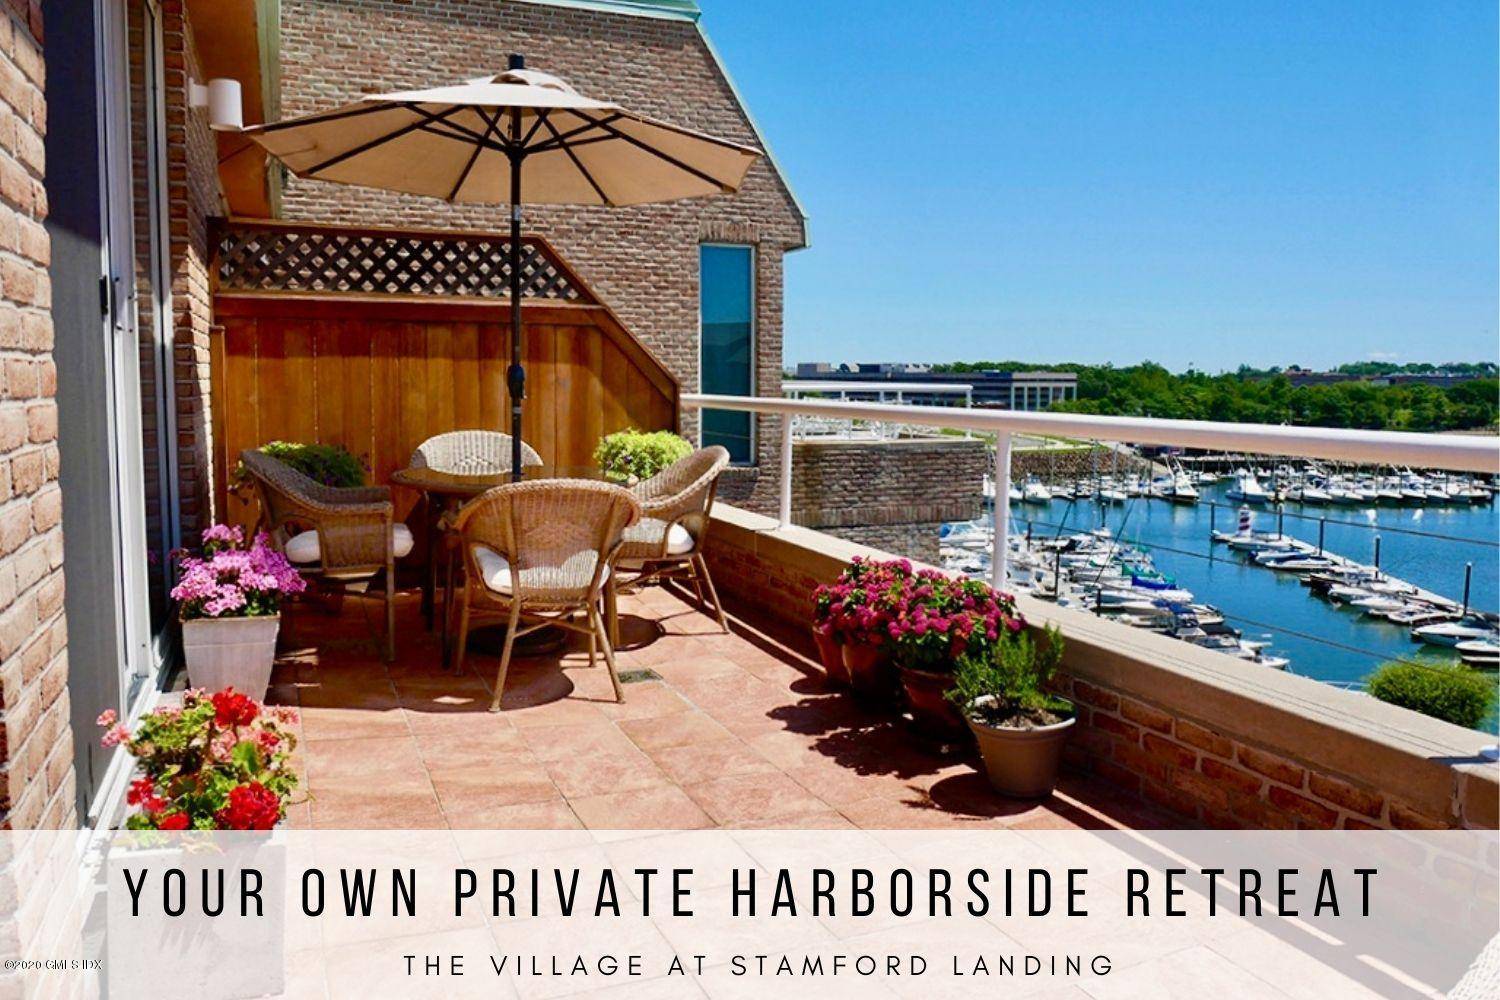 Enjoy luxury harborside living in this elegant penthouse with stunning views in the highly sought after Stamford Landing complex.